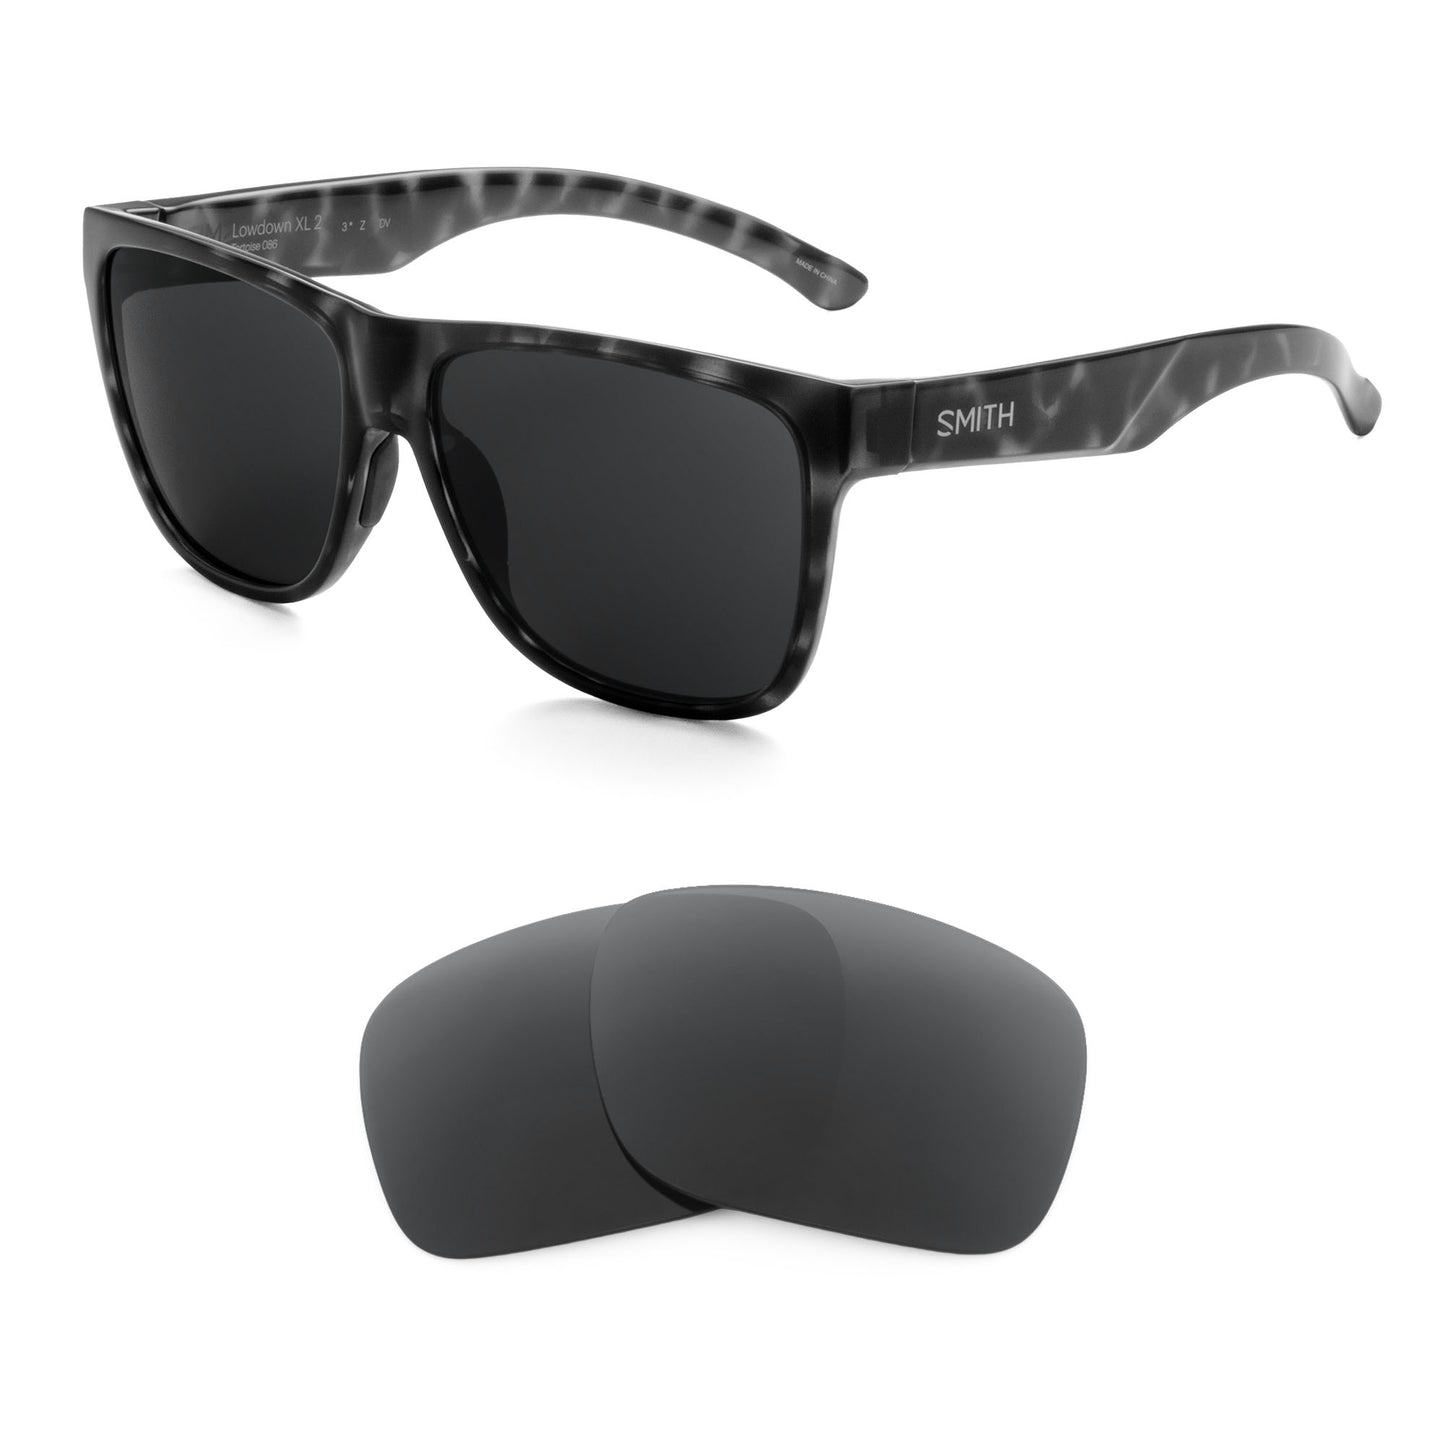 Smith Lowdown XL 2 sunglasses with replacement lenses